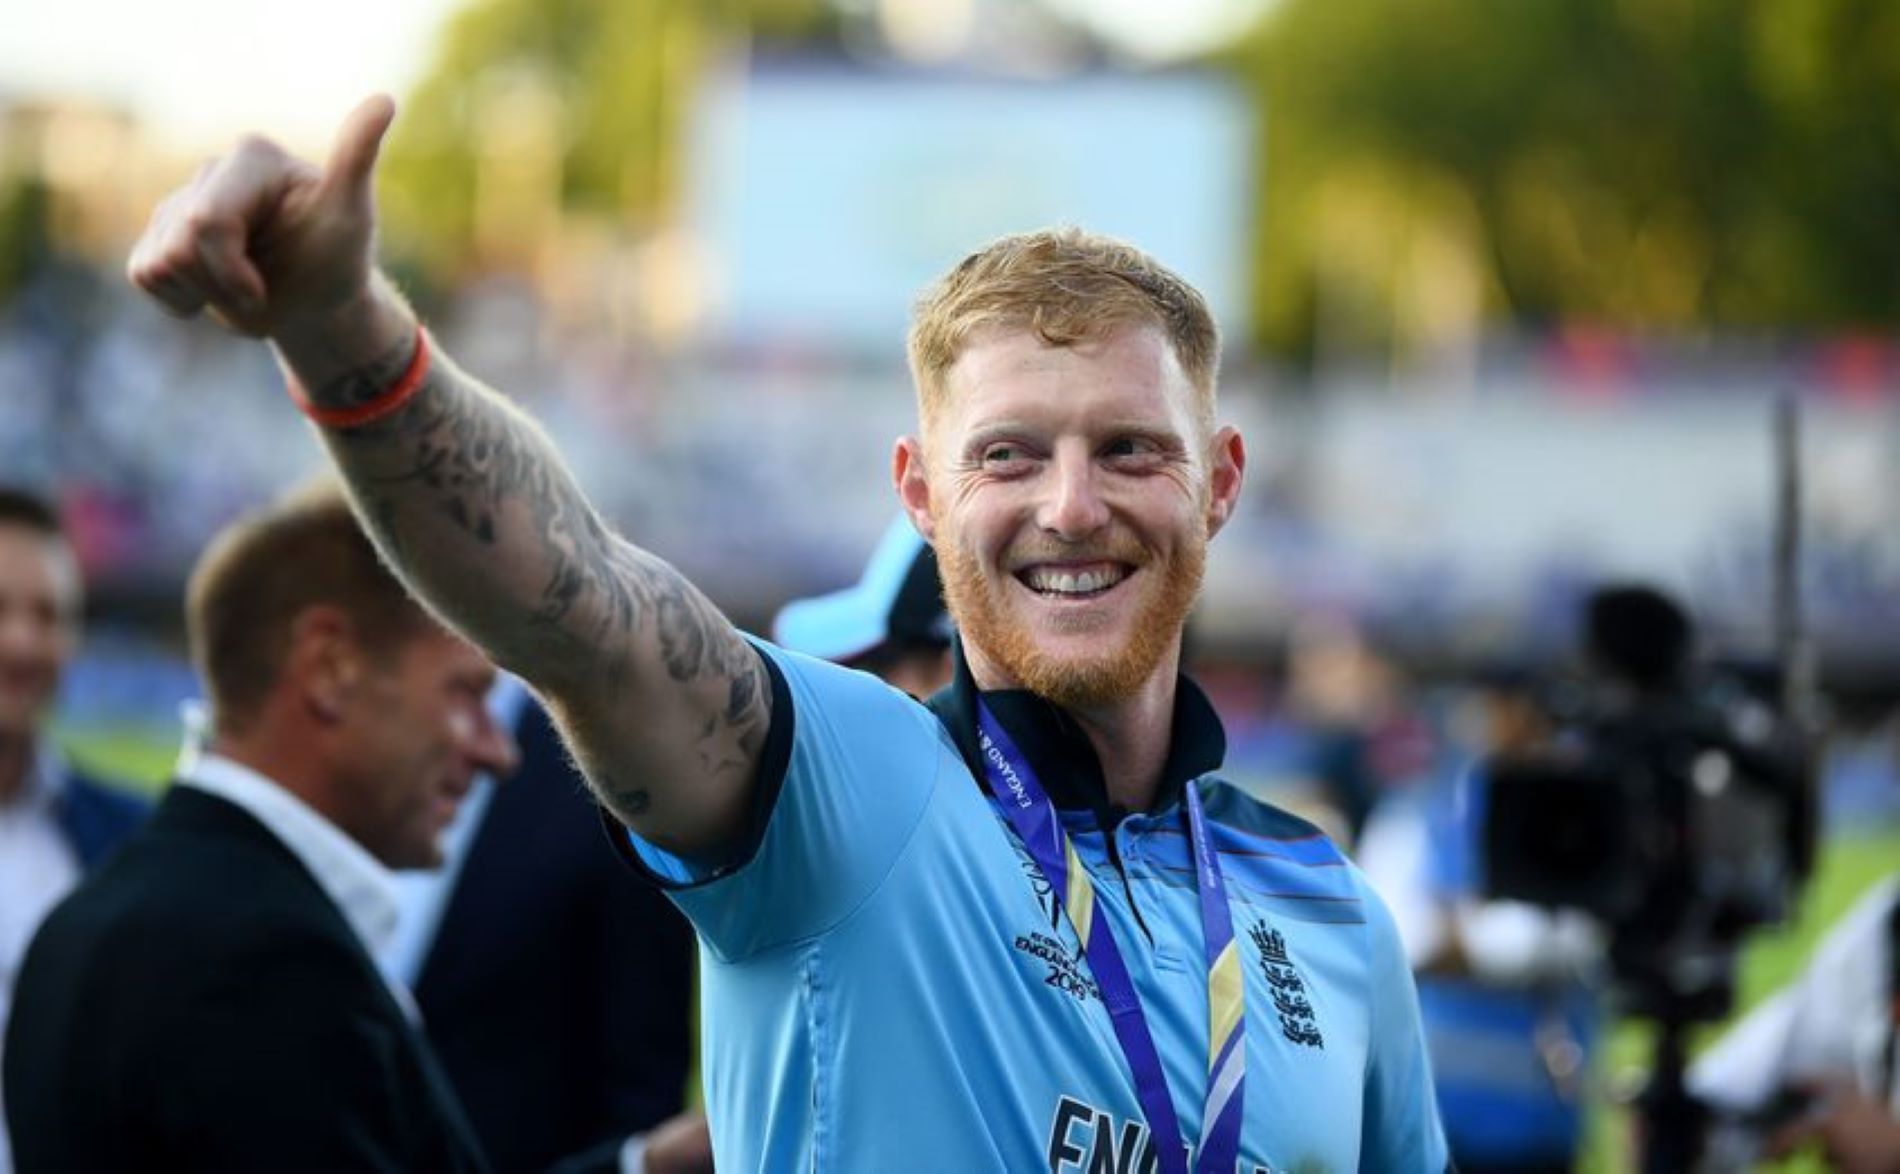 Ben Stokes will hope to repeat his heroics from the 2019 World Cup